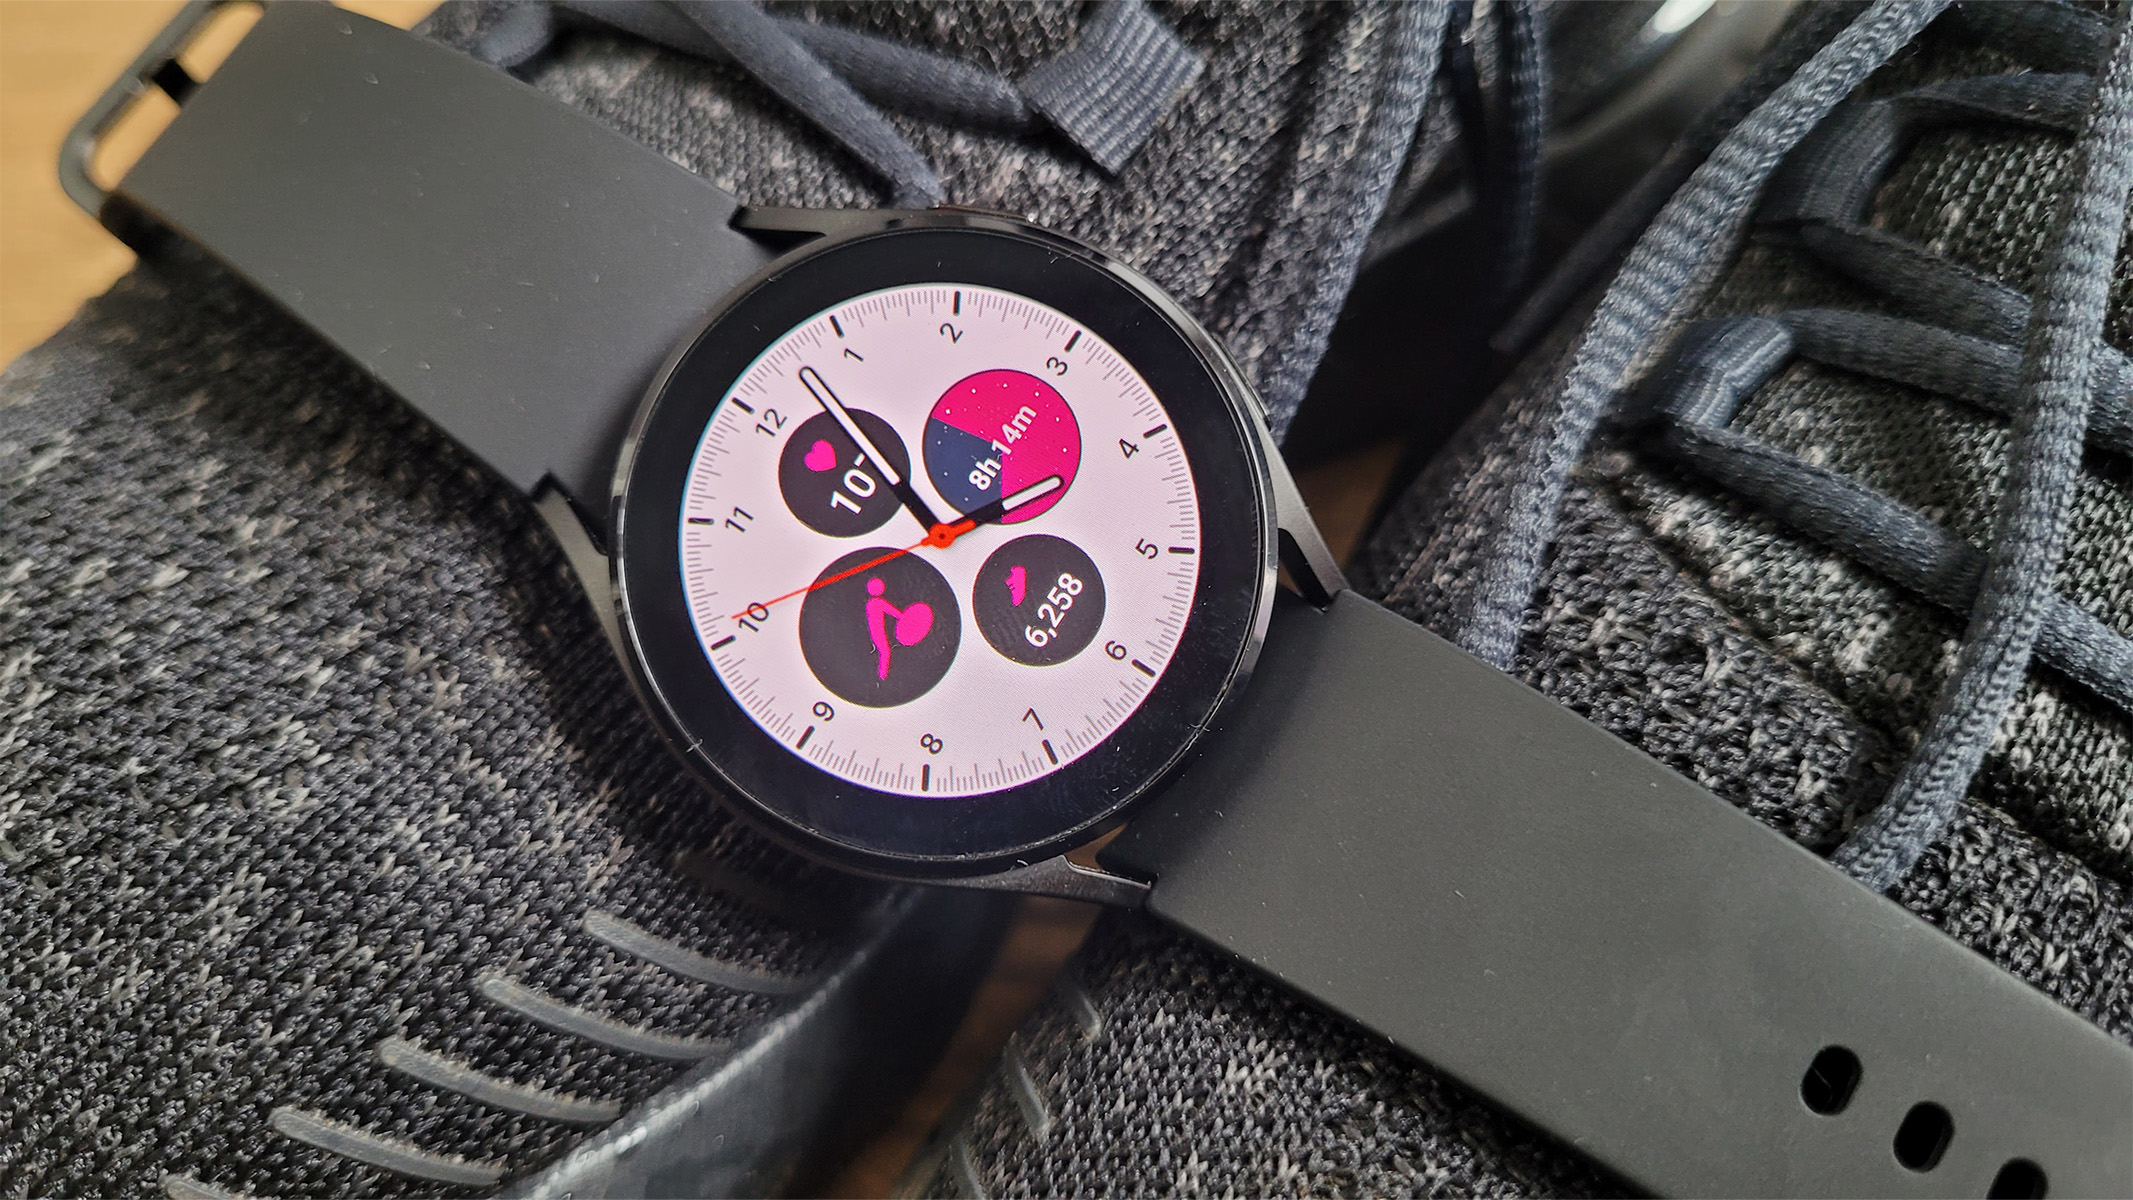 S Health turns the Galaxy S4 into a full-fledged fitness tracker